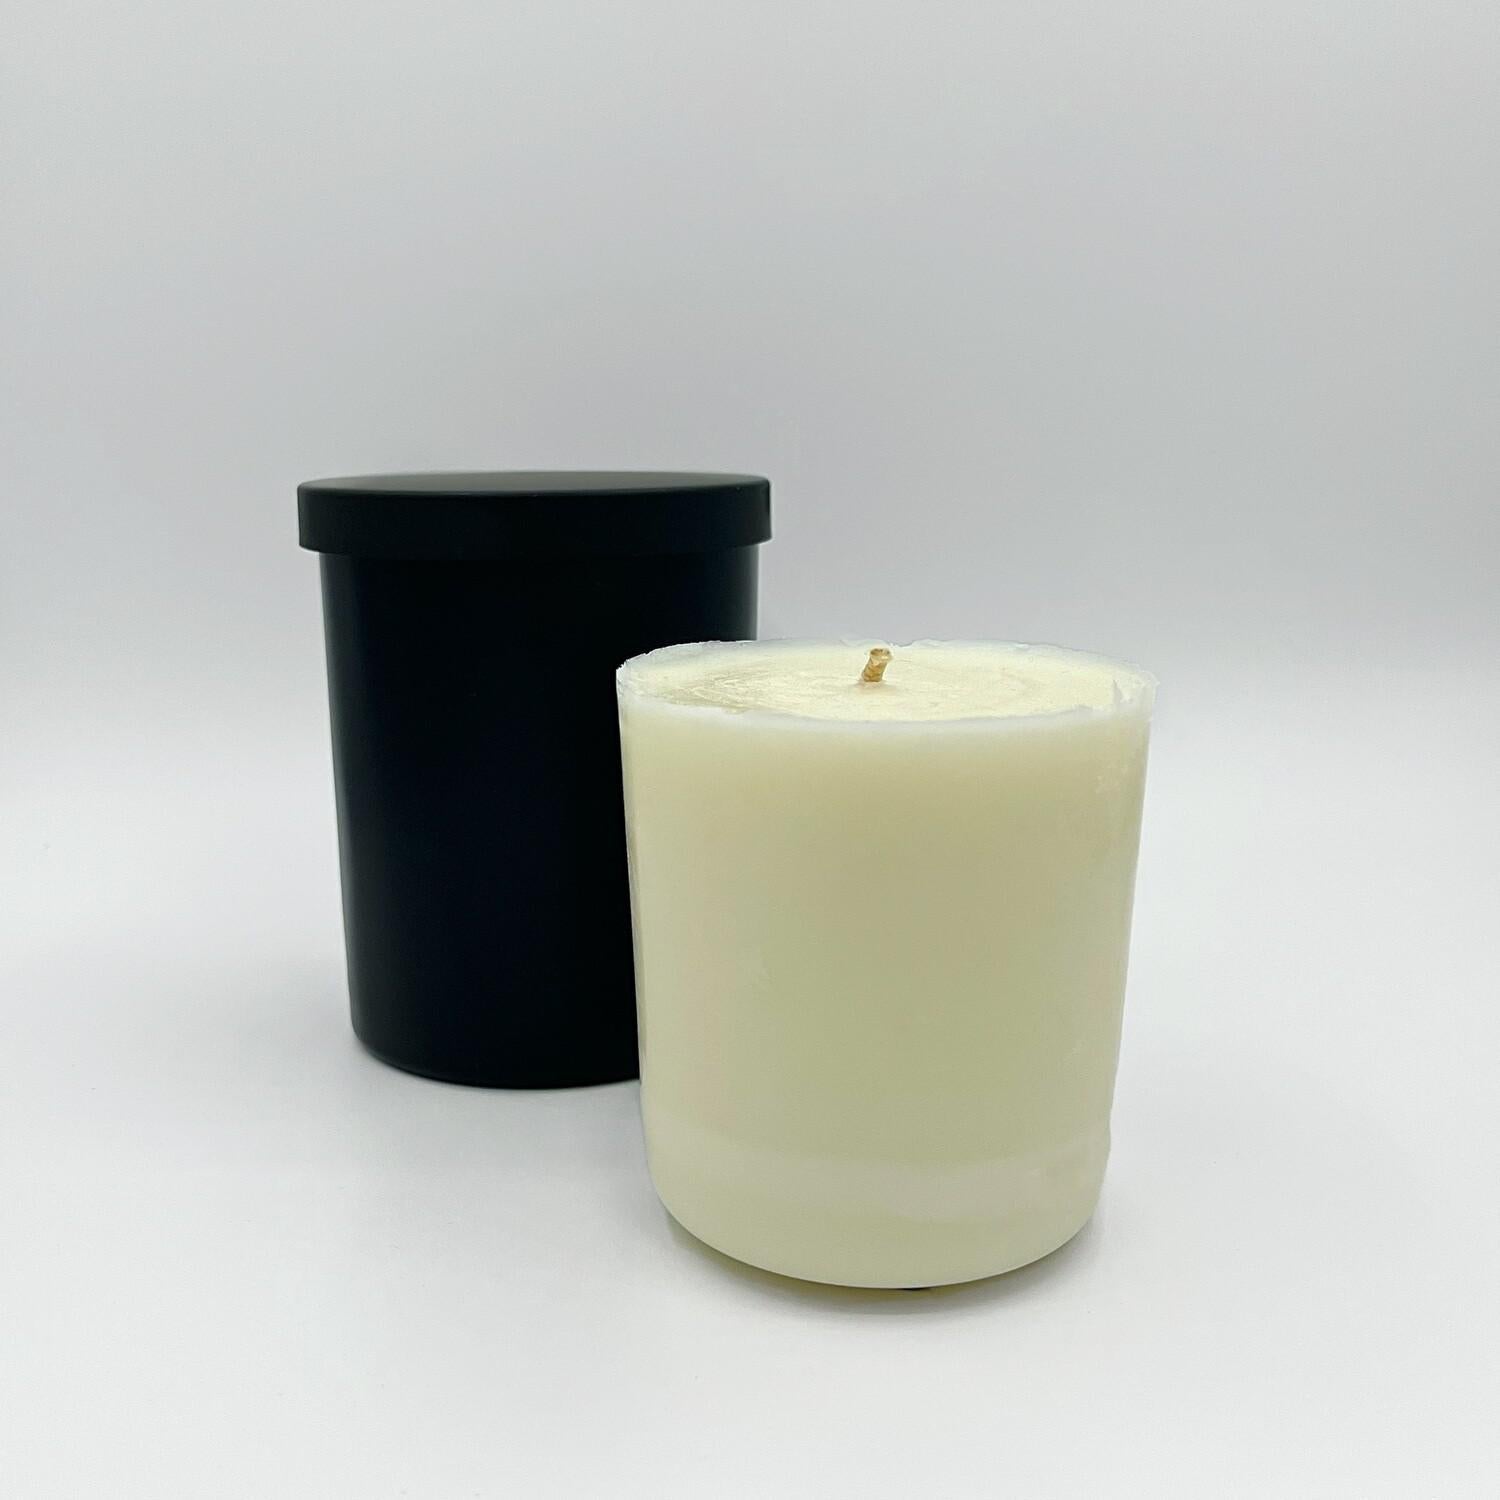 Premium Wax Candle | Morning Mantra